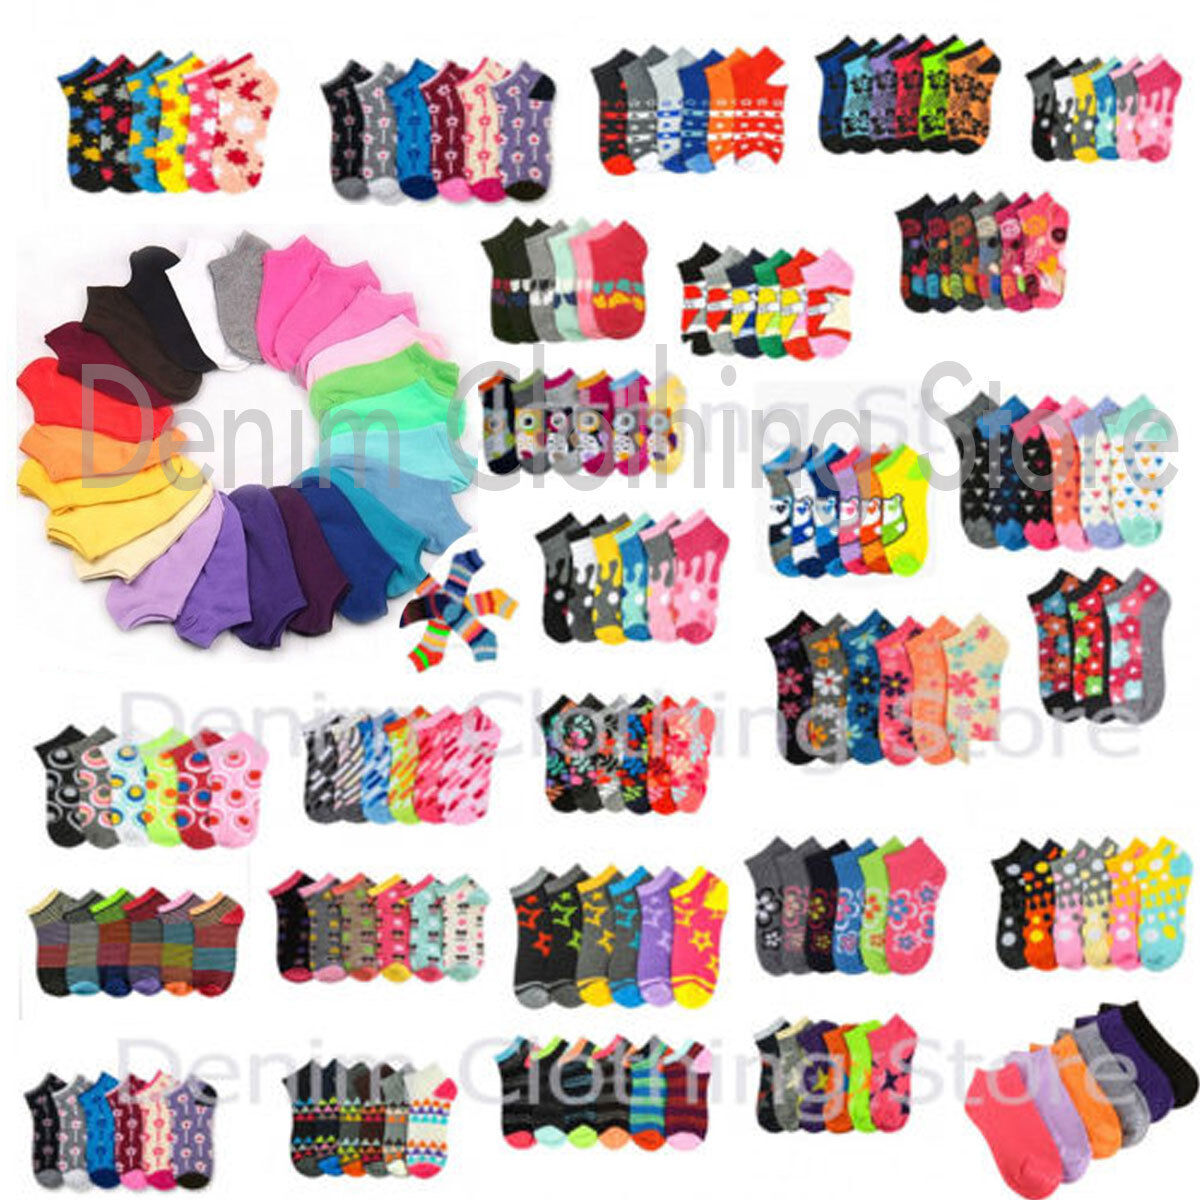 12 24 Women Girl Mixed Assorted Color Designs Ankle Low Cut Socks No Show Lot